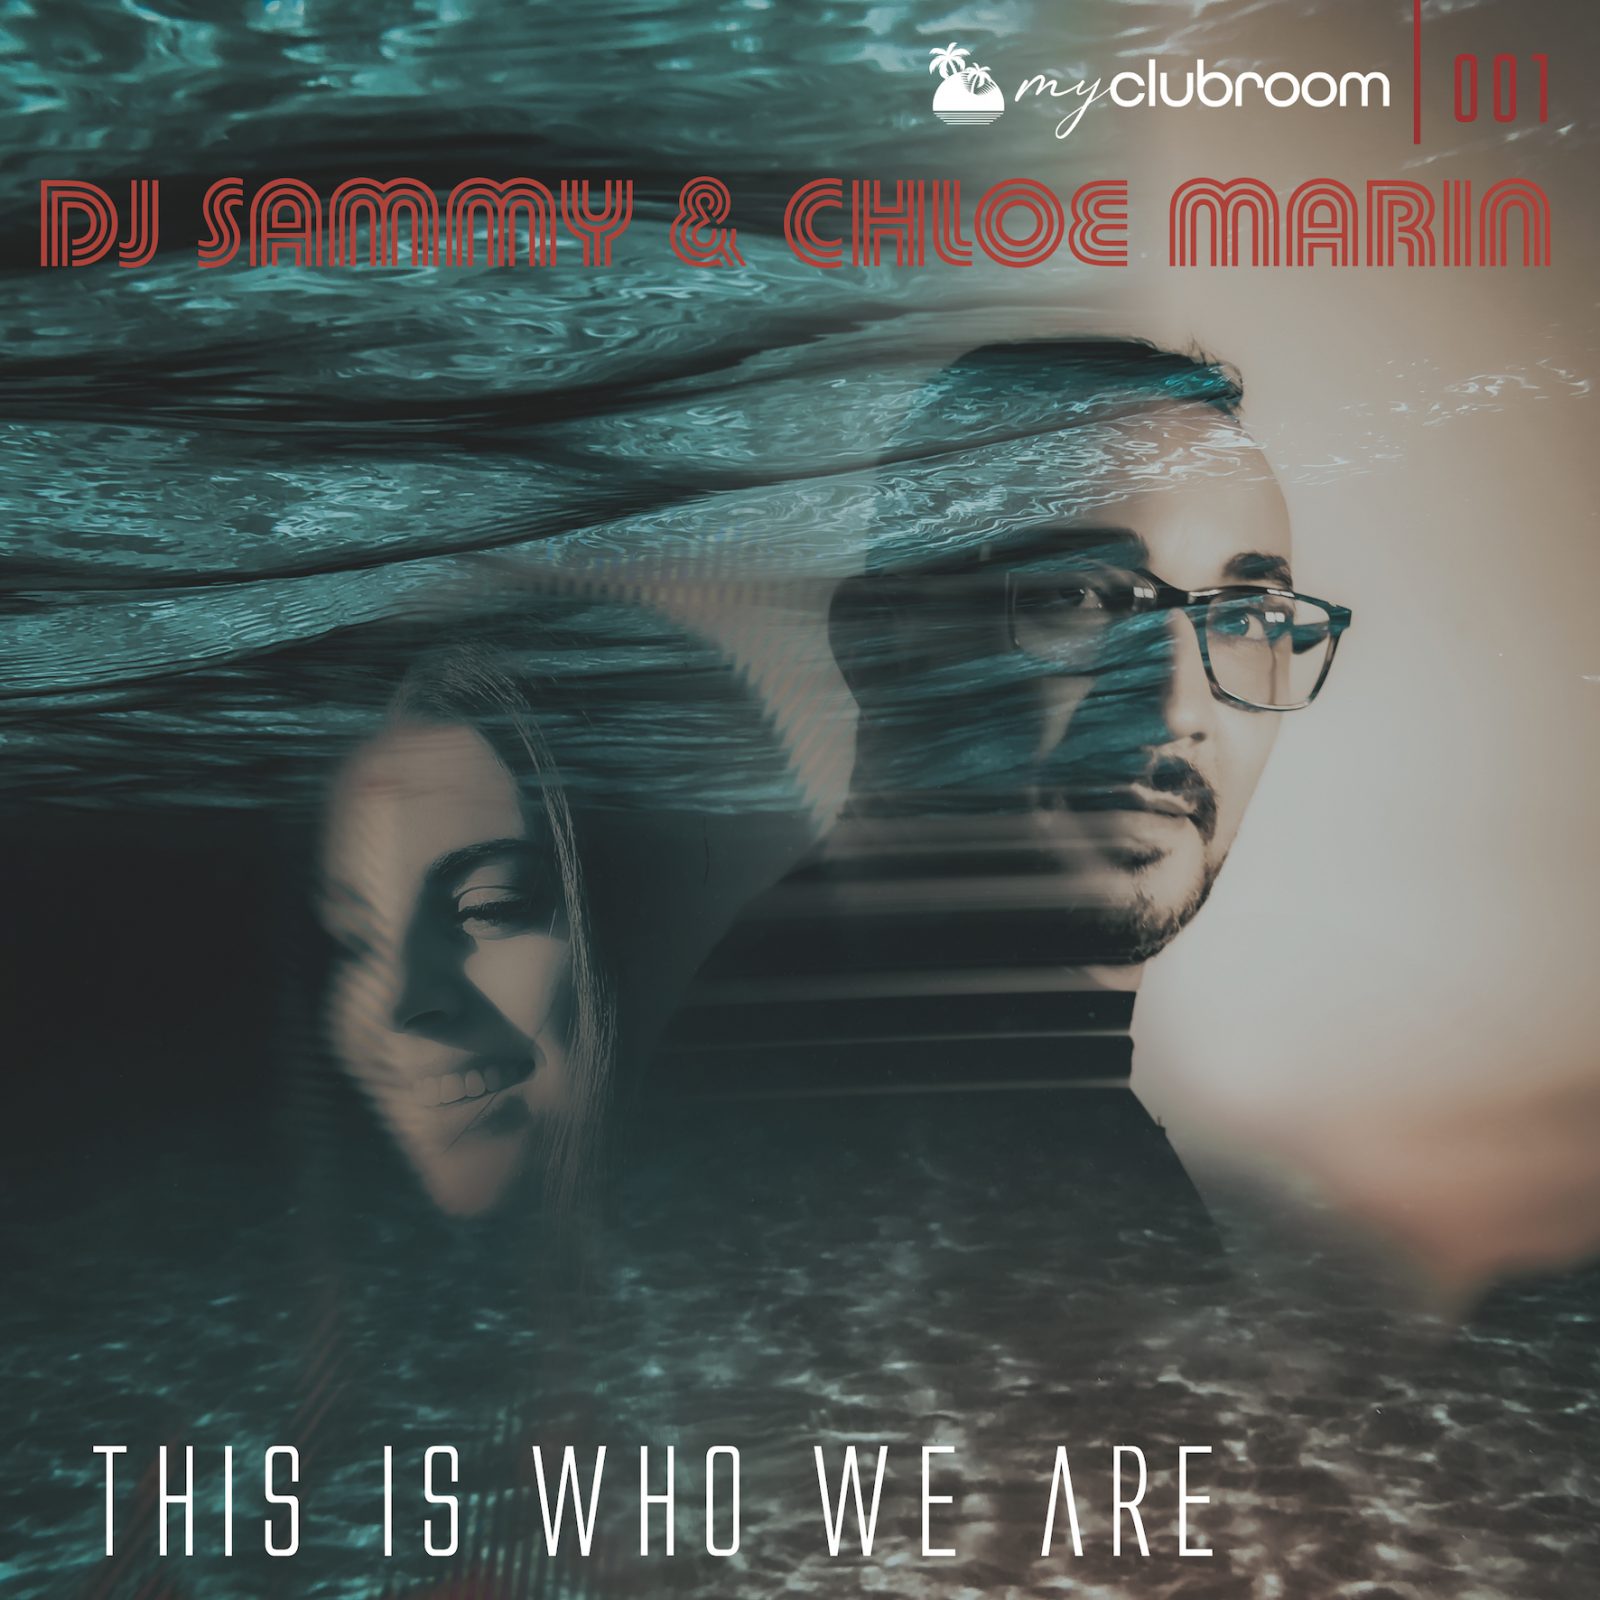  DJ Sammy & Chloe Marin - This Is Who We Are